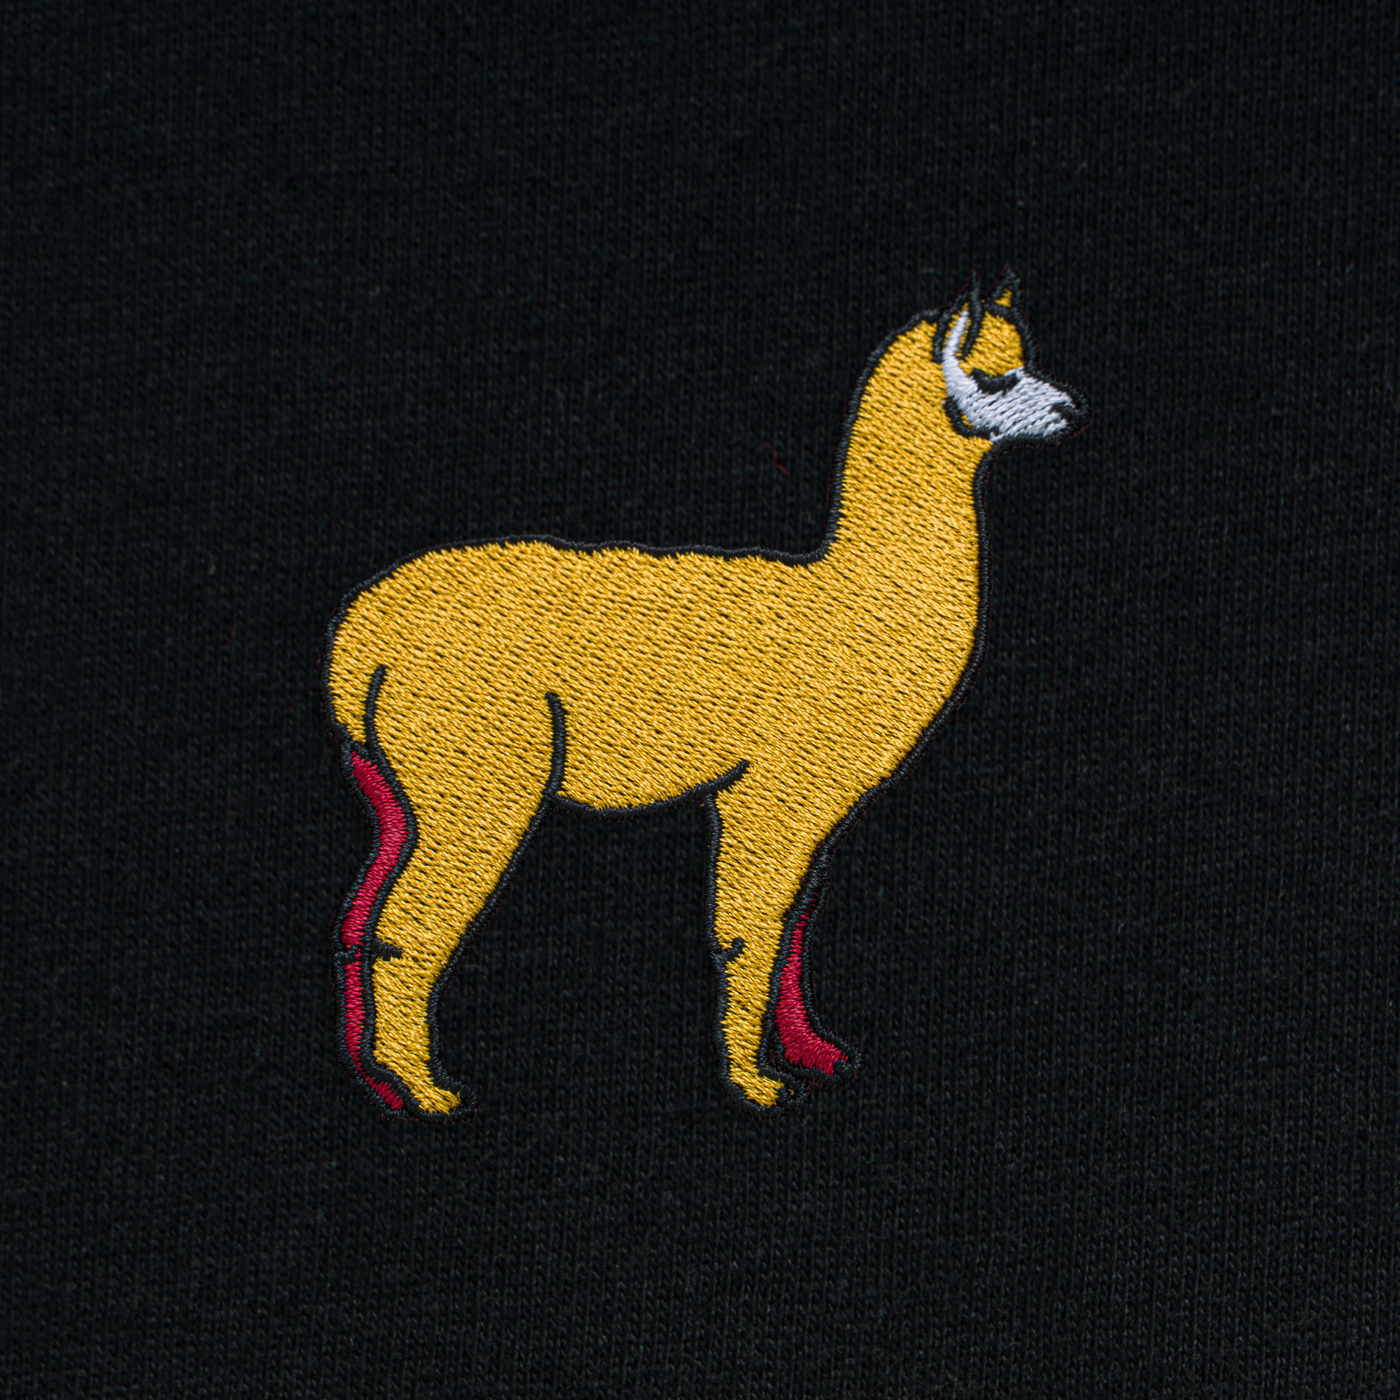 Bobby's Planet Kids Embroidered Alpaca T-Shirt from South American Amazon Animals Collection in Black Color#color_black